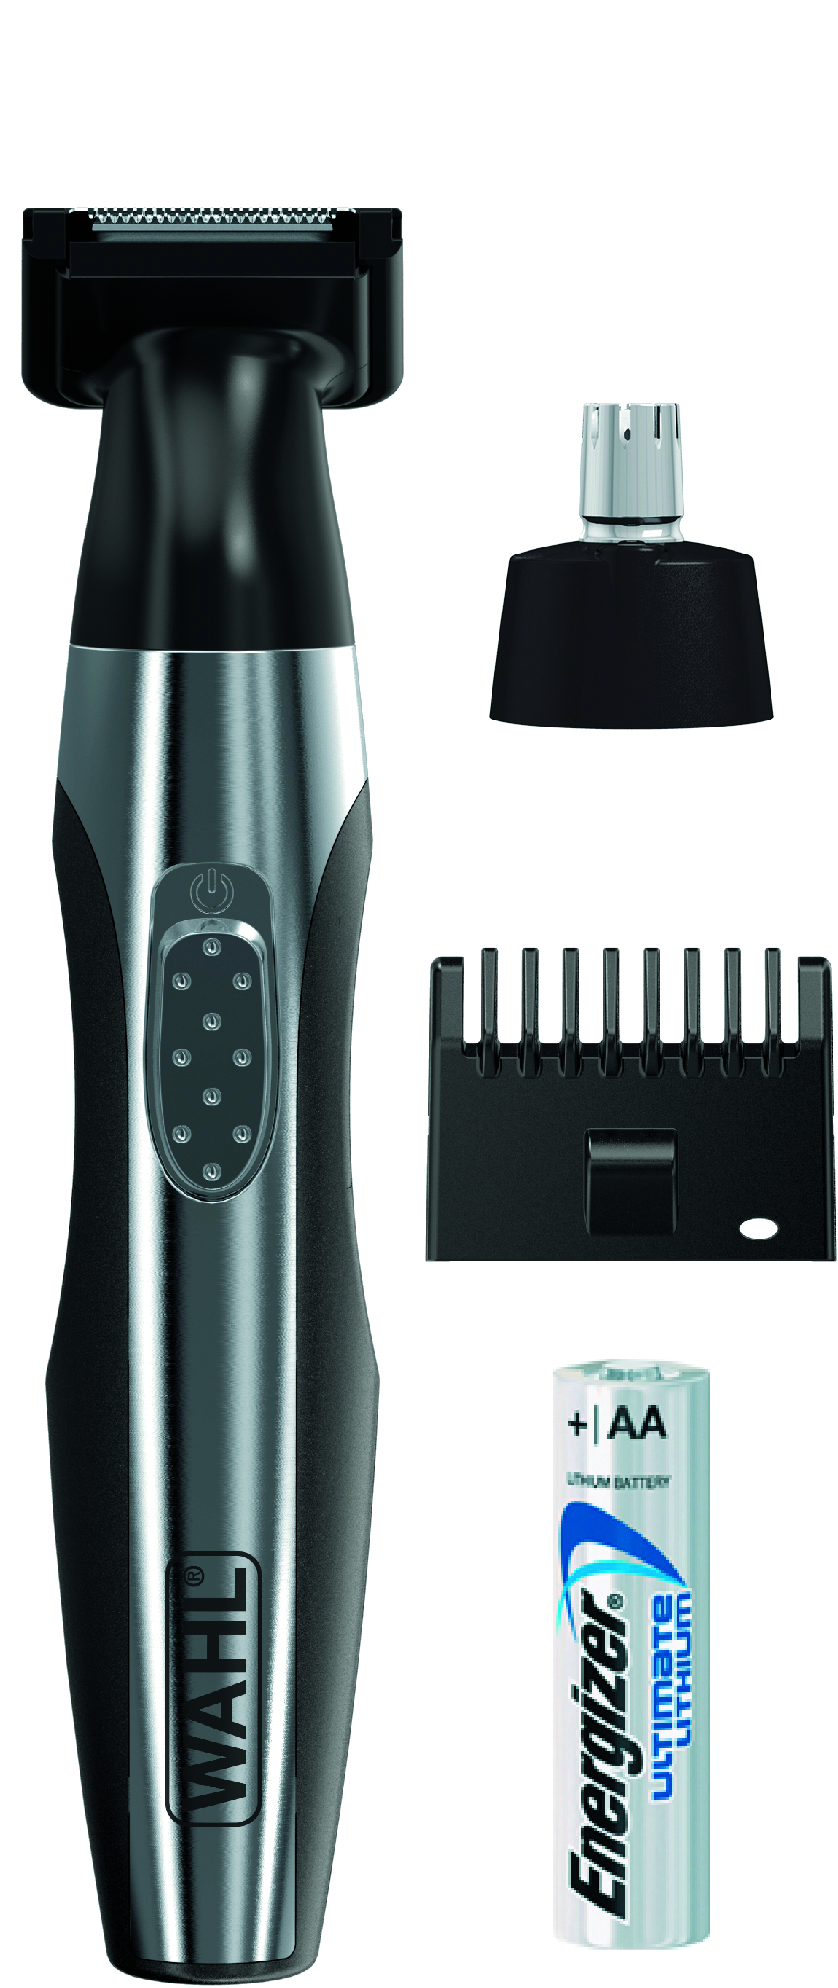 Wahl Lithium Quick Style Trimmer